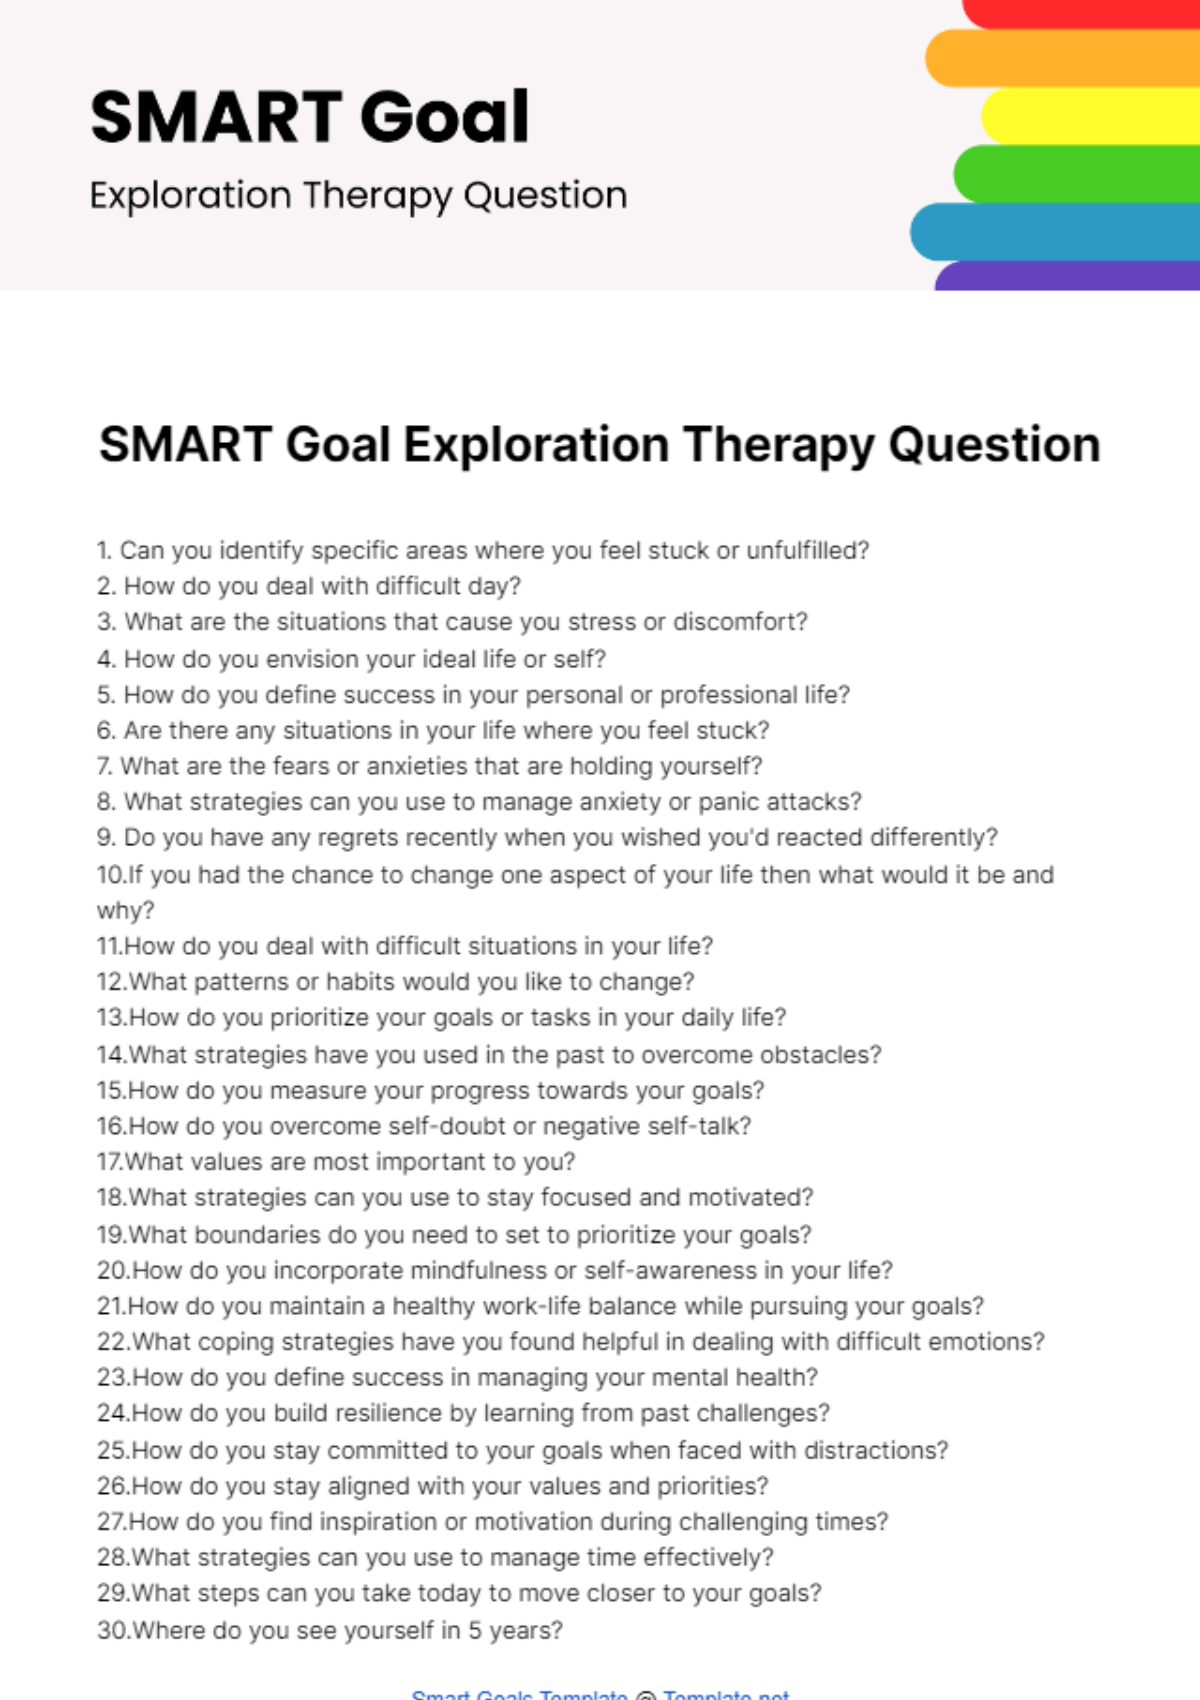 Free Therapy Questions for SMART Goal Exploration Template